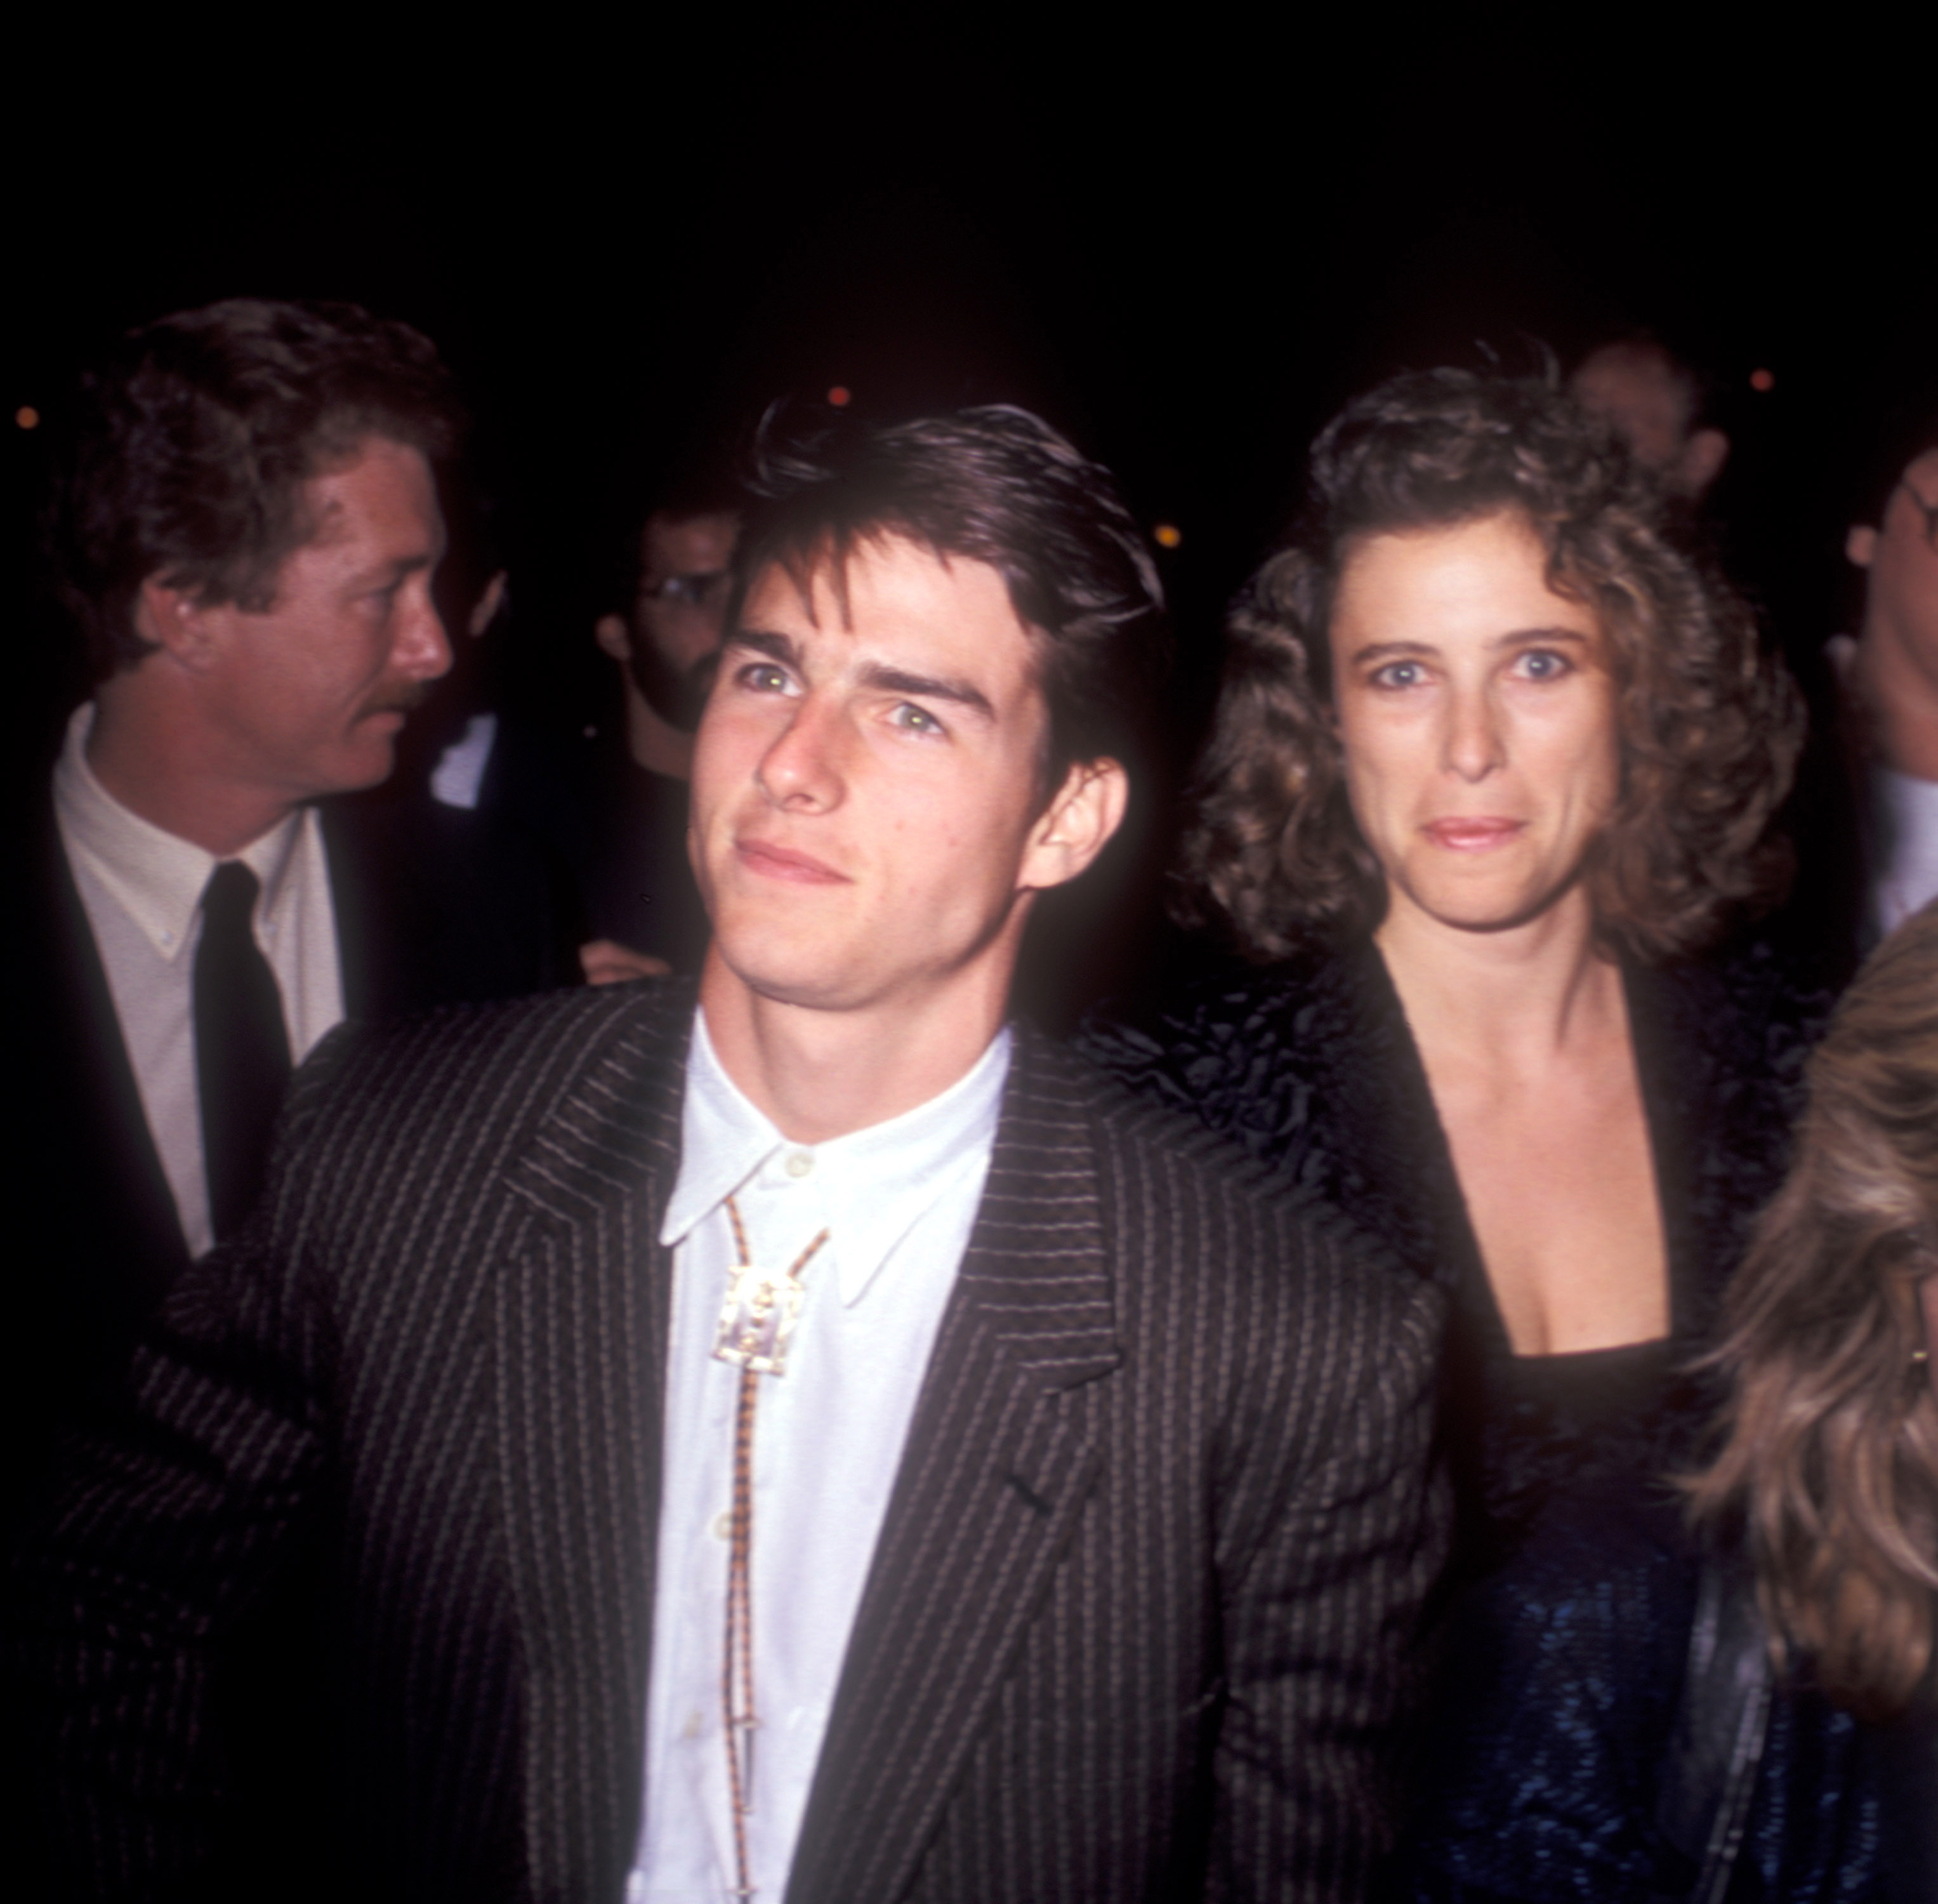 Tom Cruise and Mimi Rogers during "The Color of Money" premiere on October 14, 1986 in Los Angeles, California | Source: Getty Images